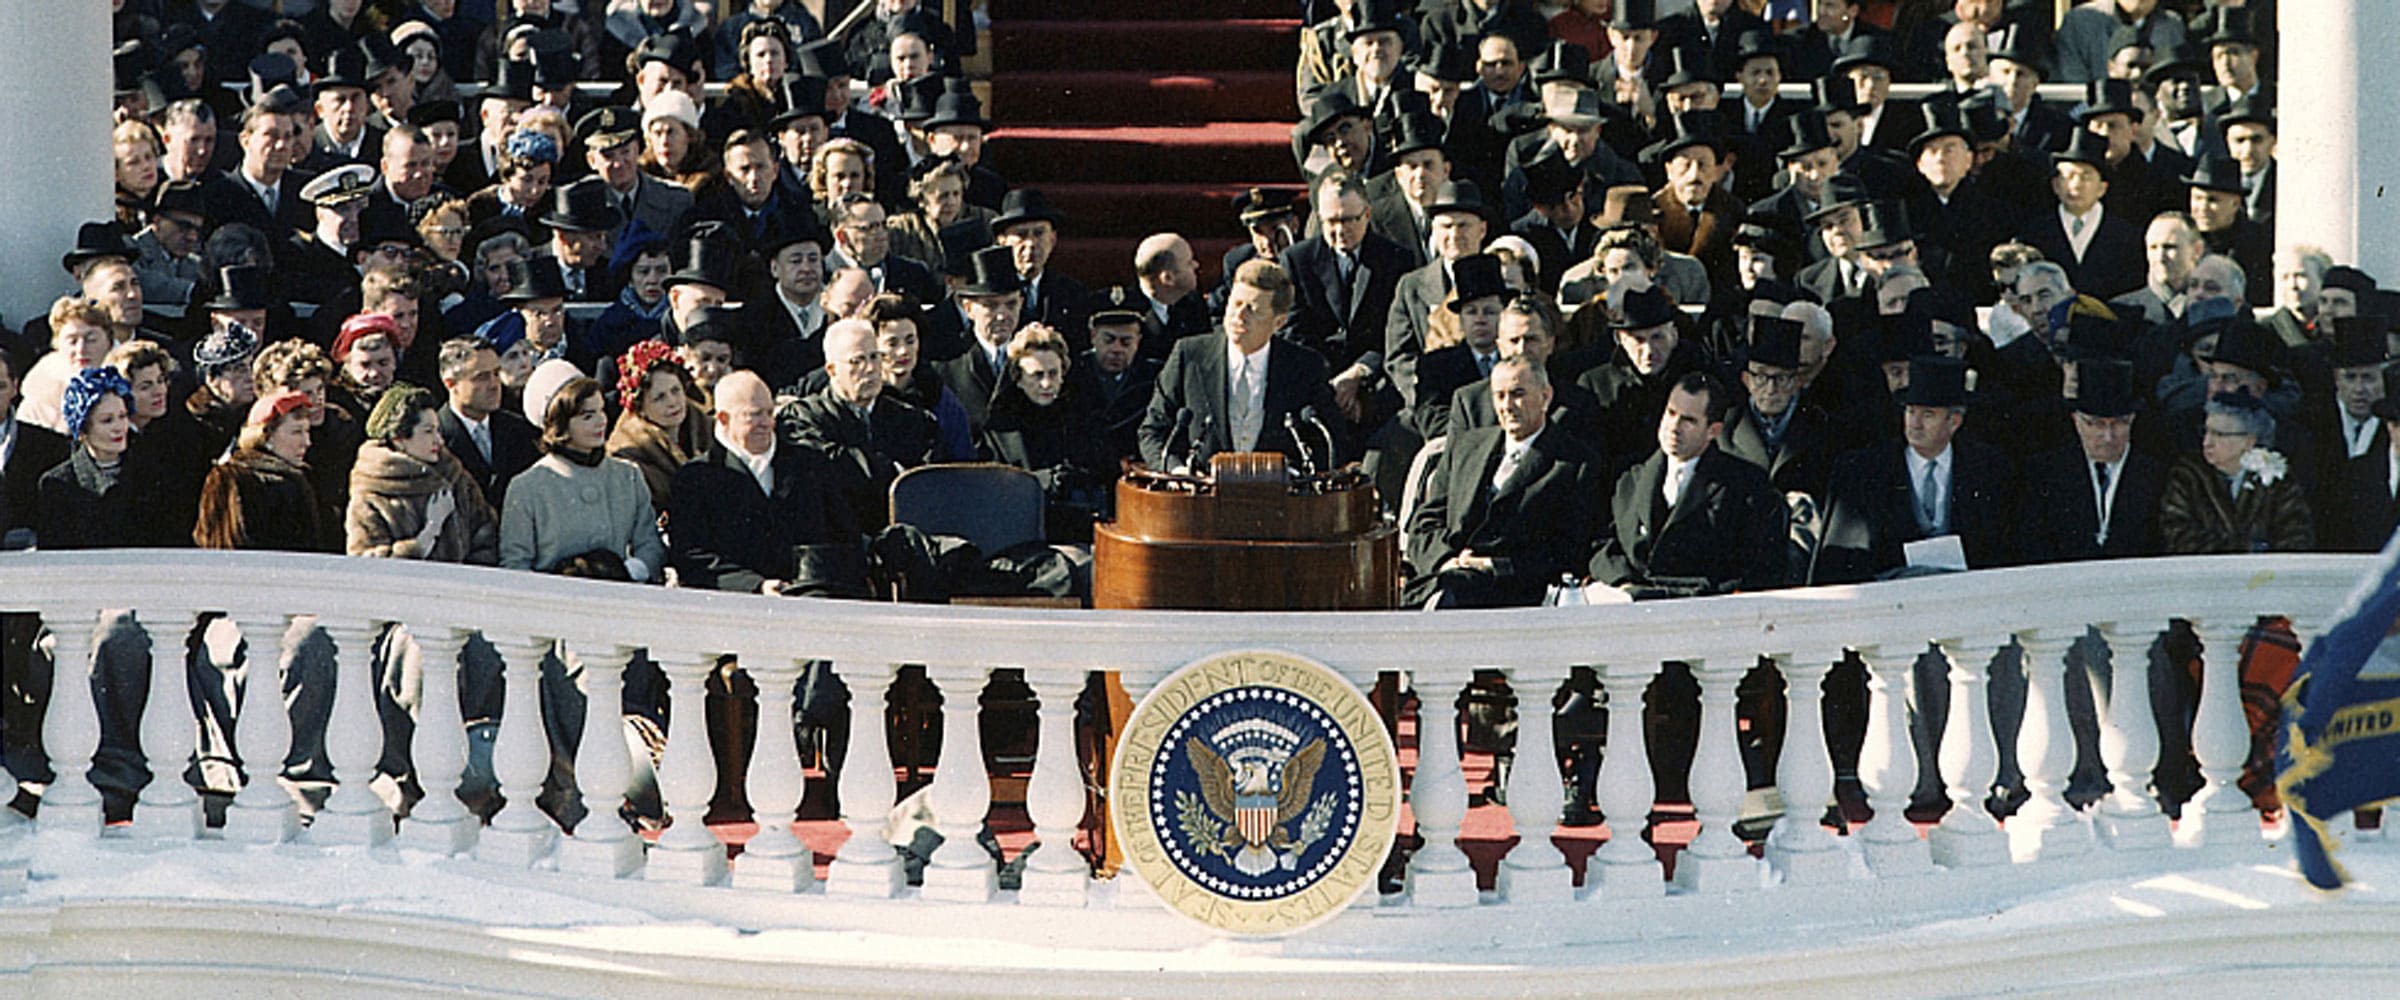 What Is Parallelism In John F Kennedys Inaugural Speech